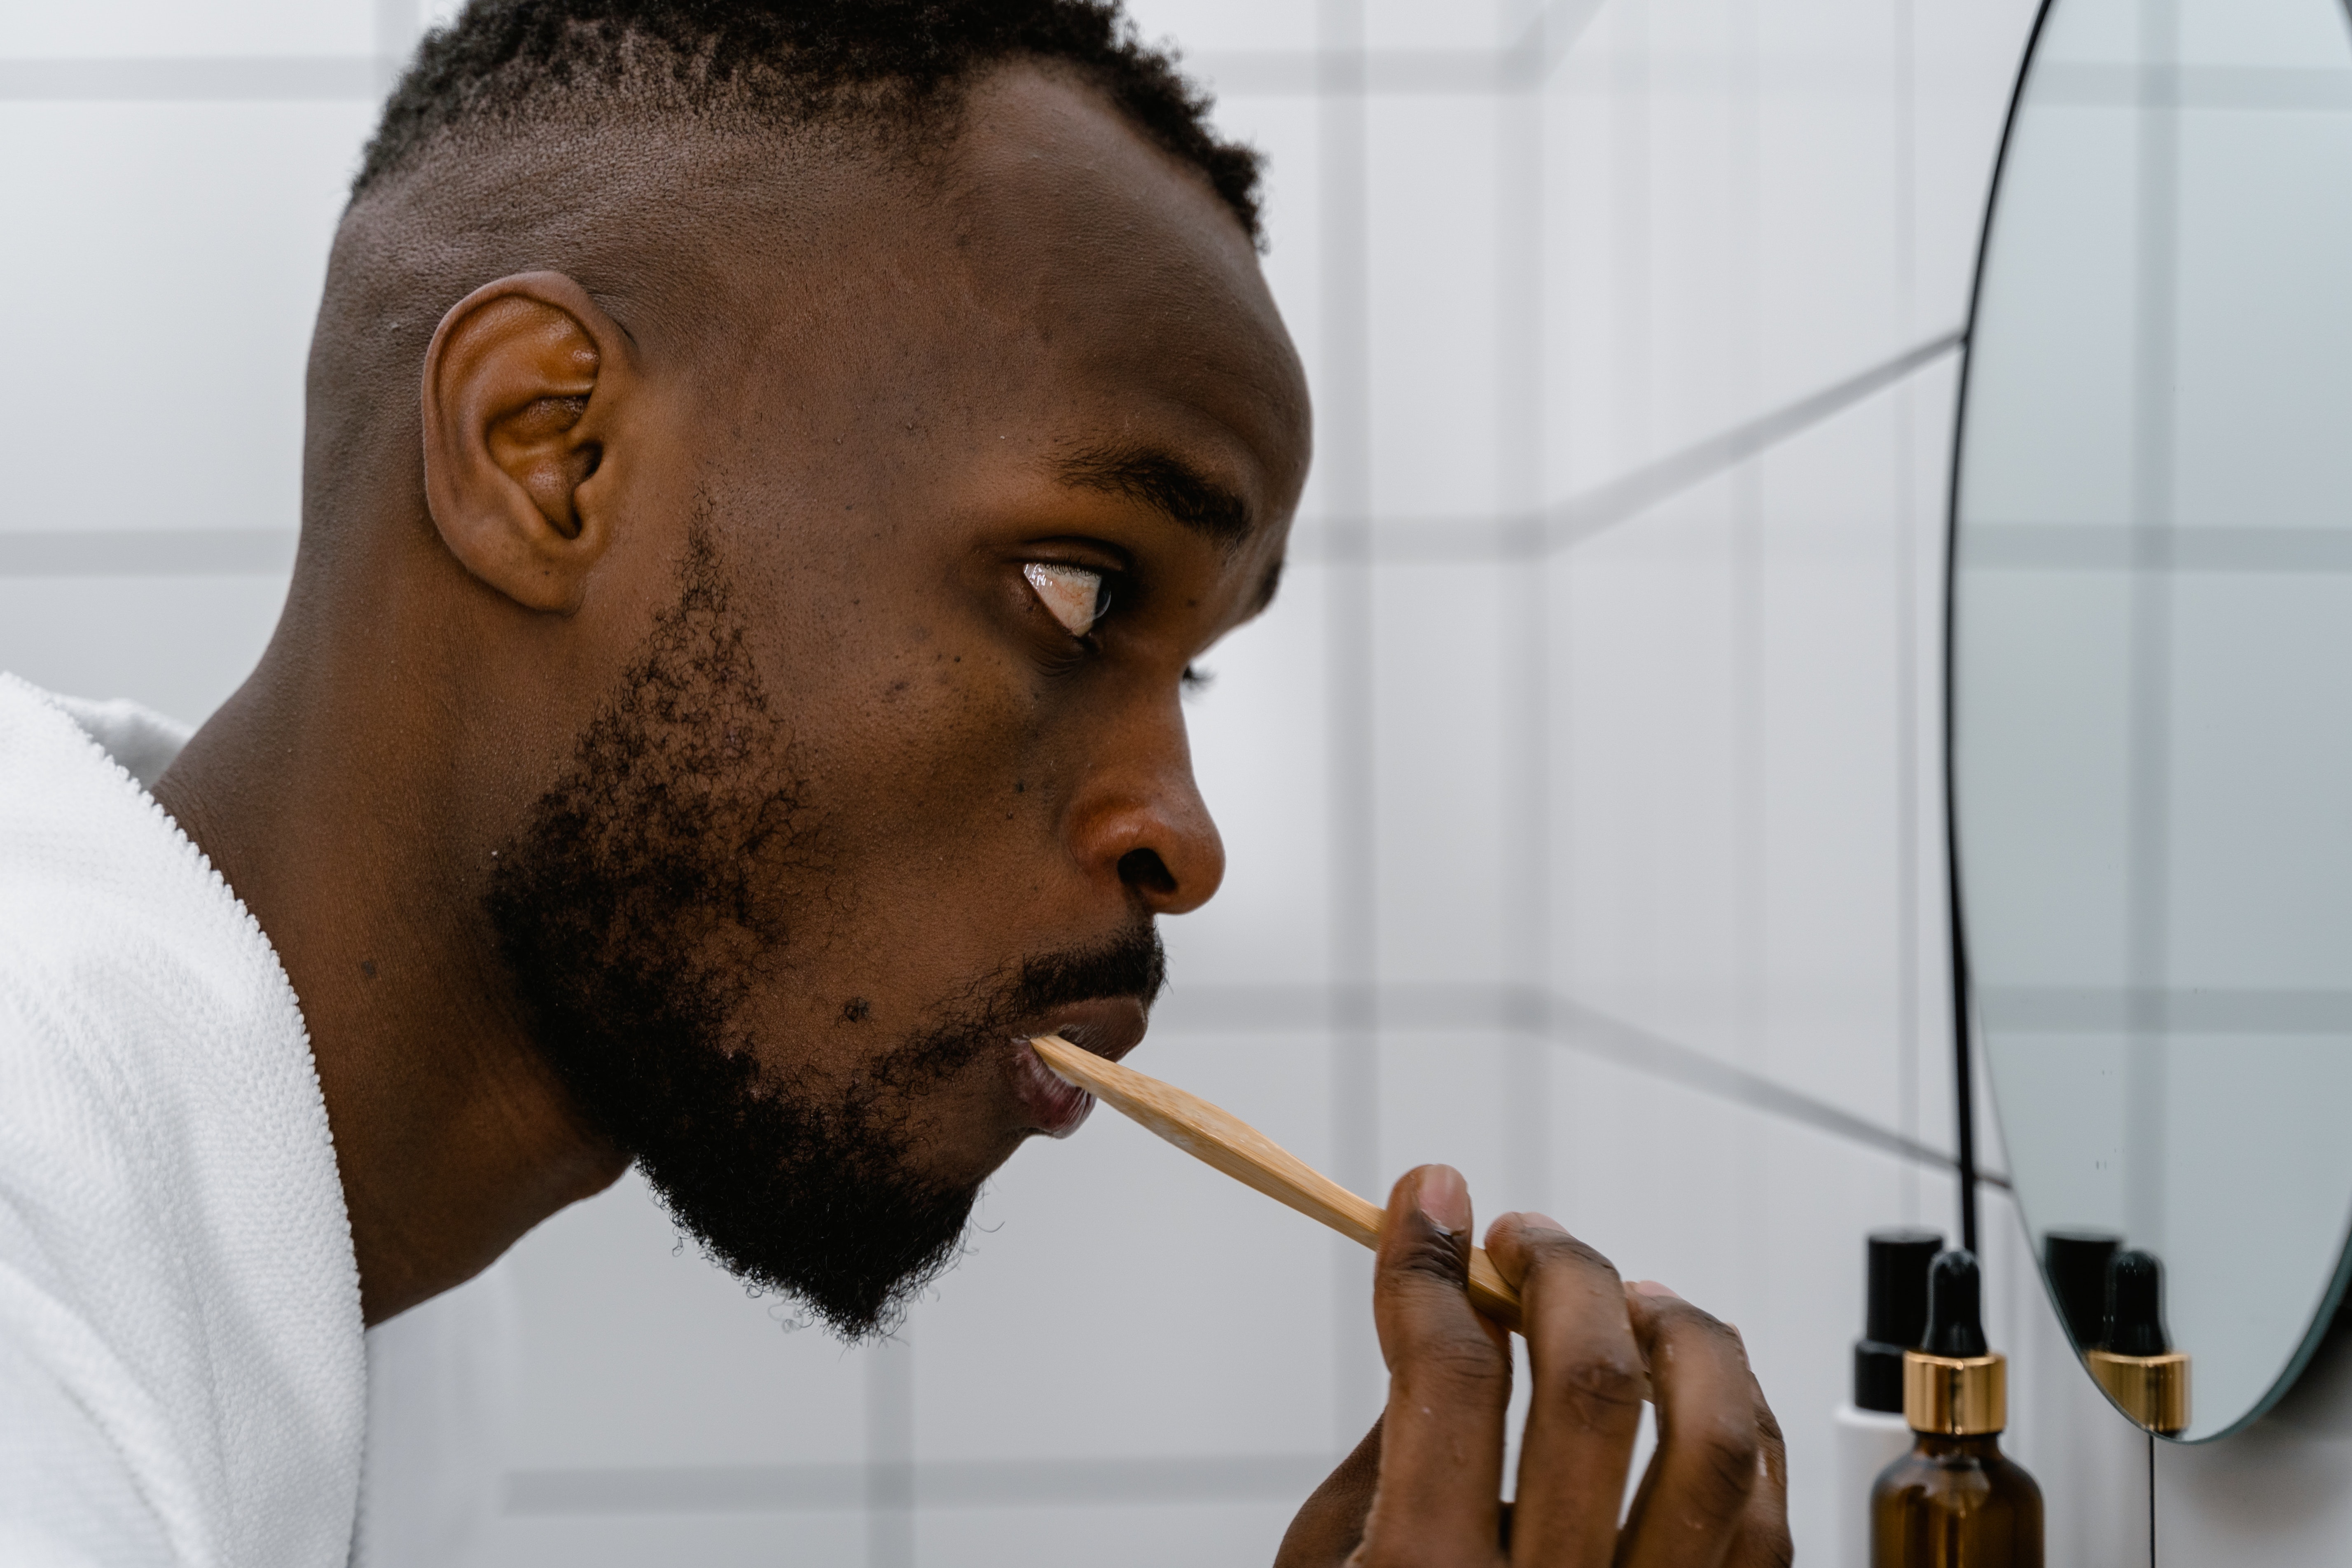 Impotence and gum disease: is there a connection?